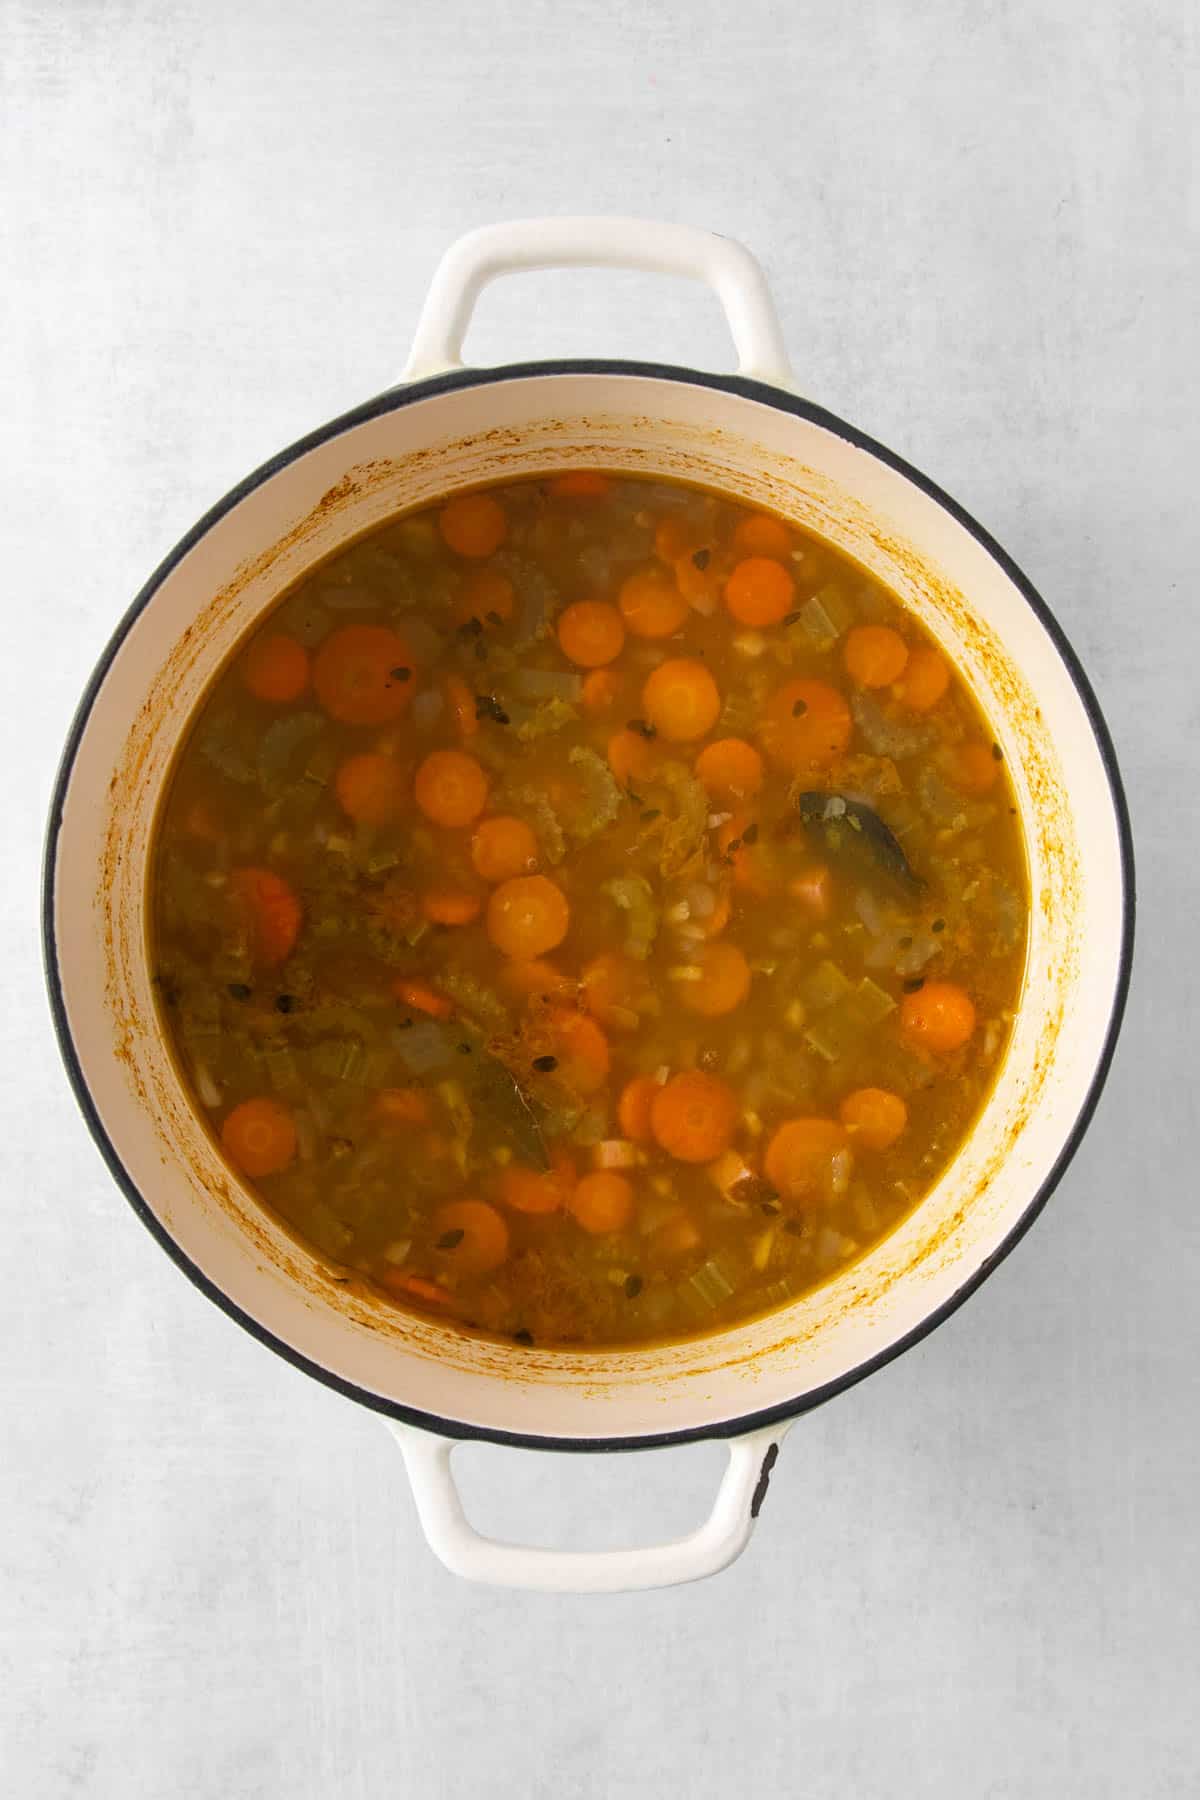 Simmered split pea soup ingredients in a pot.